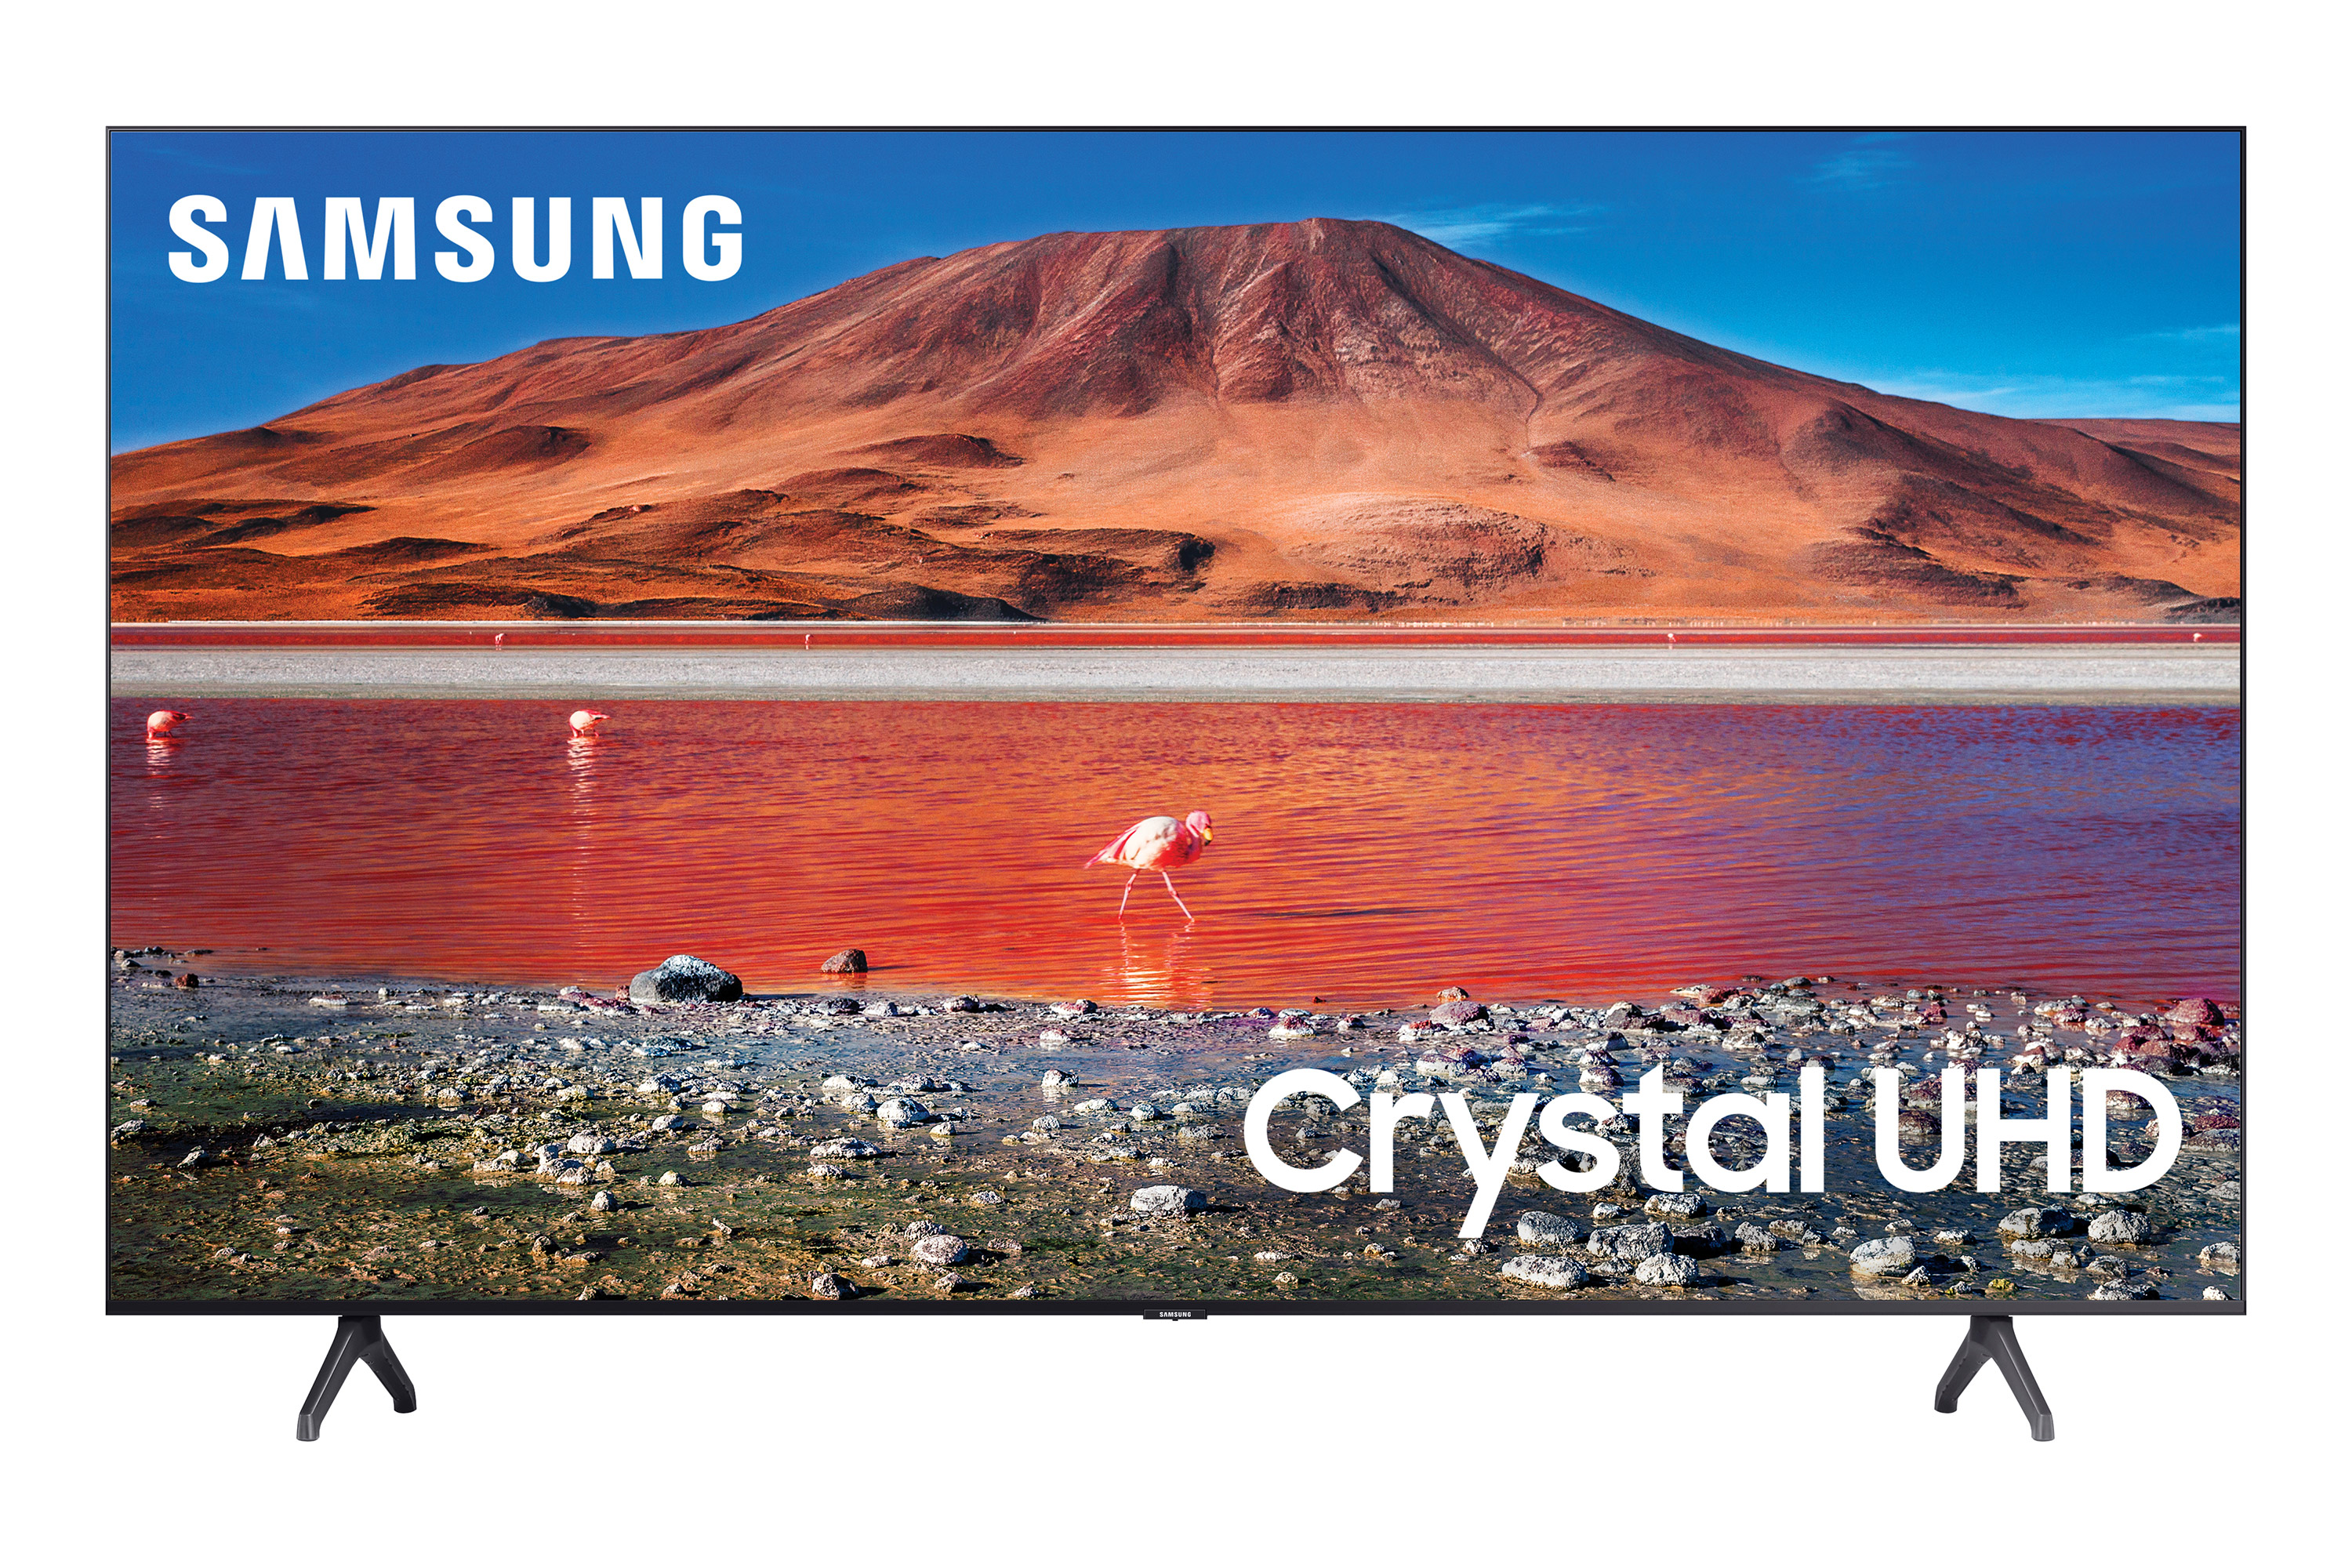 SAMSUNG 85" Class 4K Crystal UHD (2160P) LED Smart TV with HDR UN85TU7000 - image 1 of 8